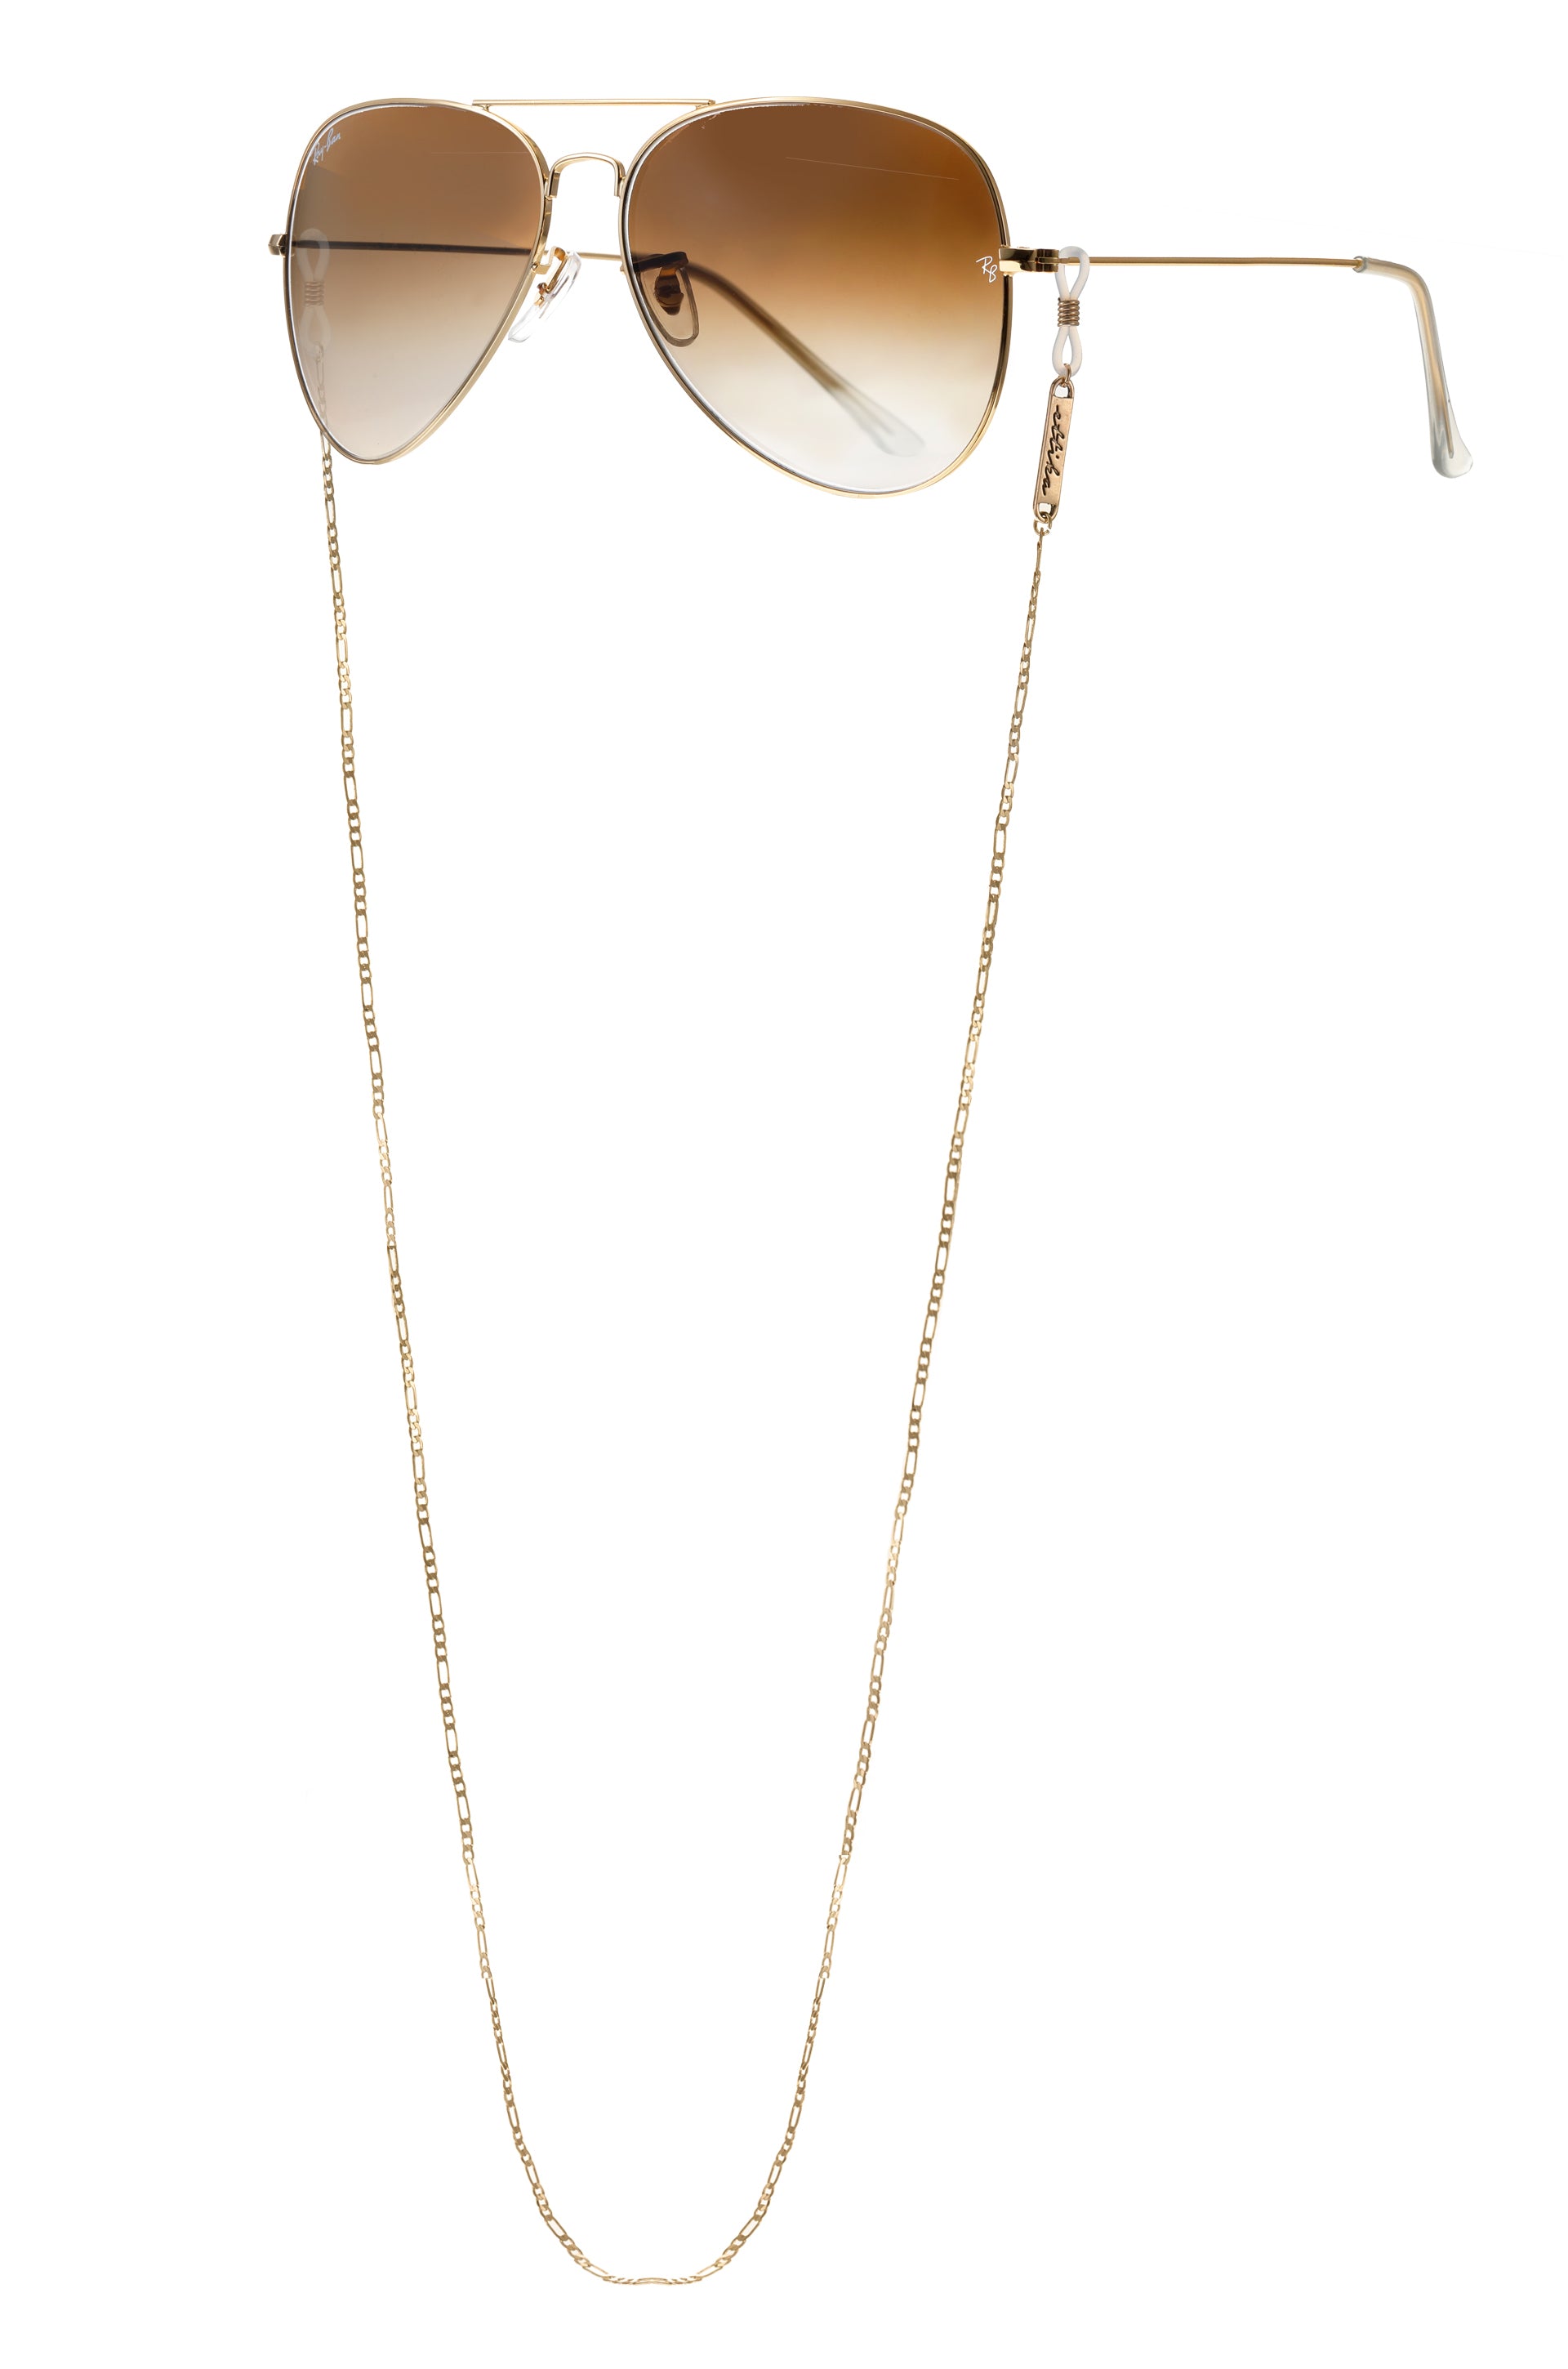 Everyday Glasses Chain in gold on white